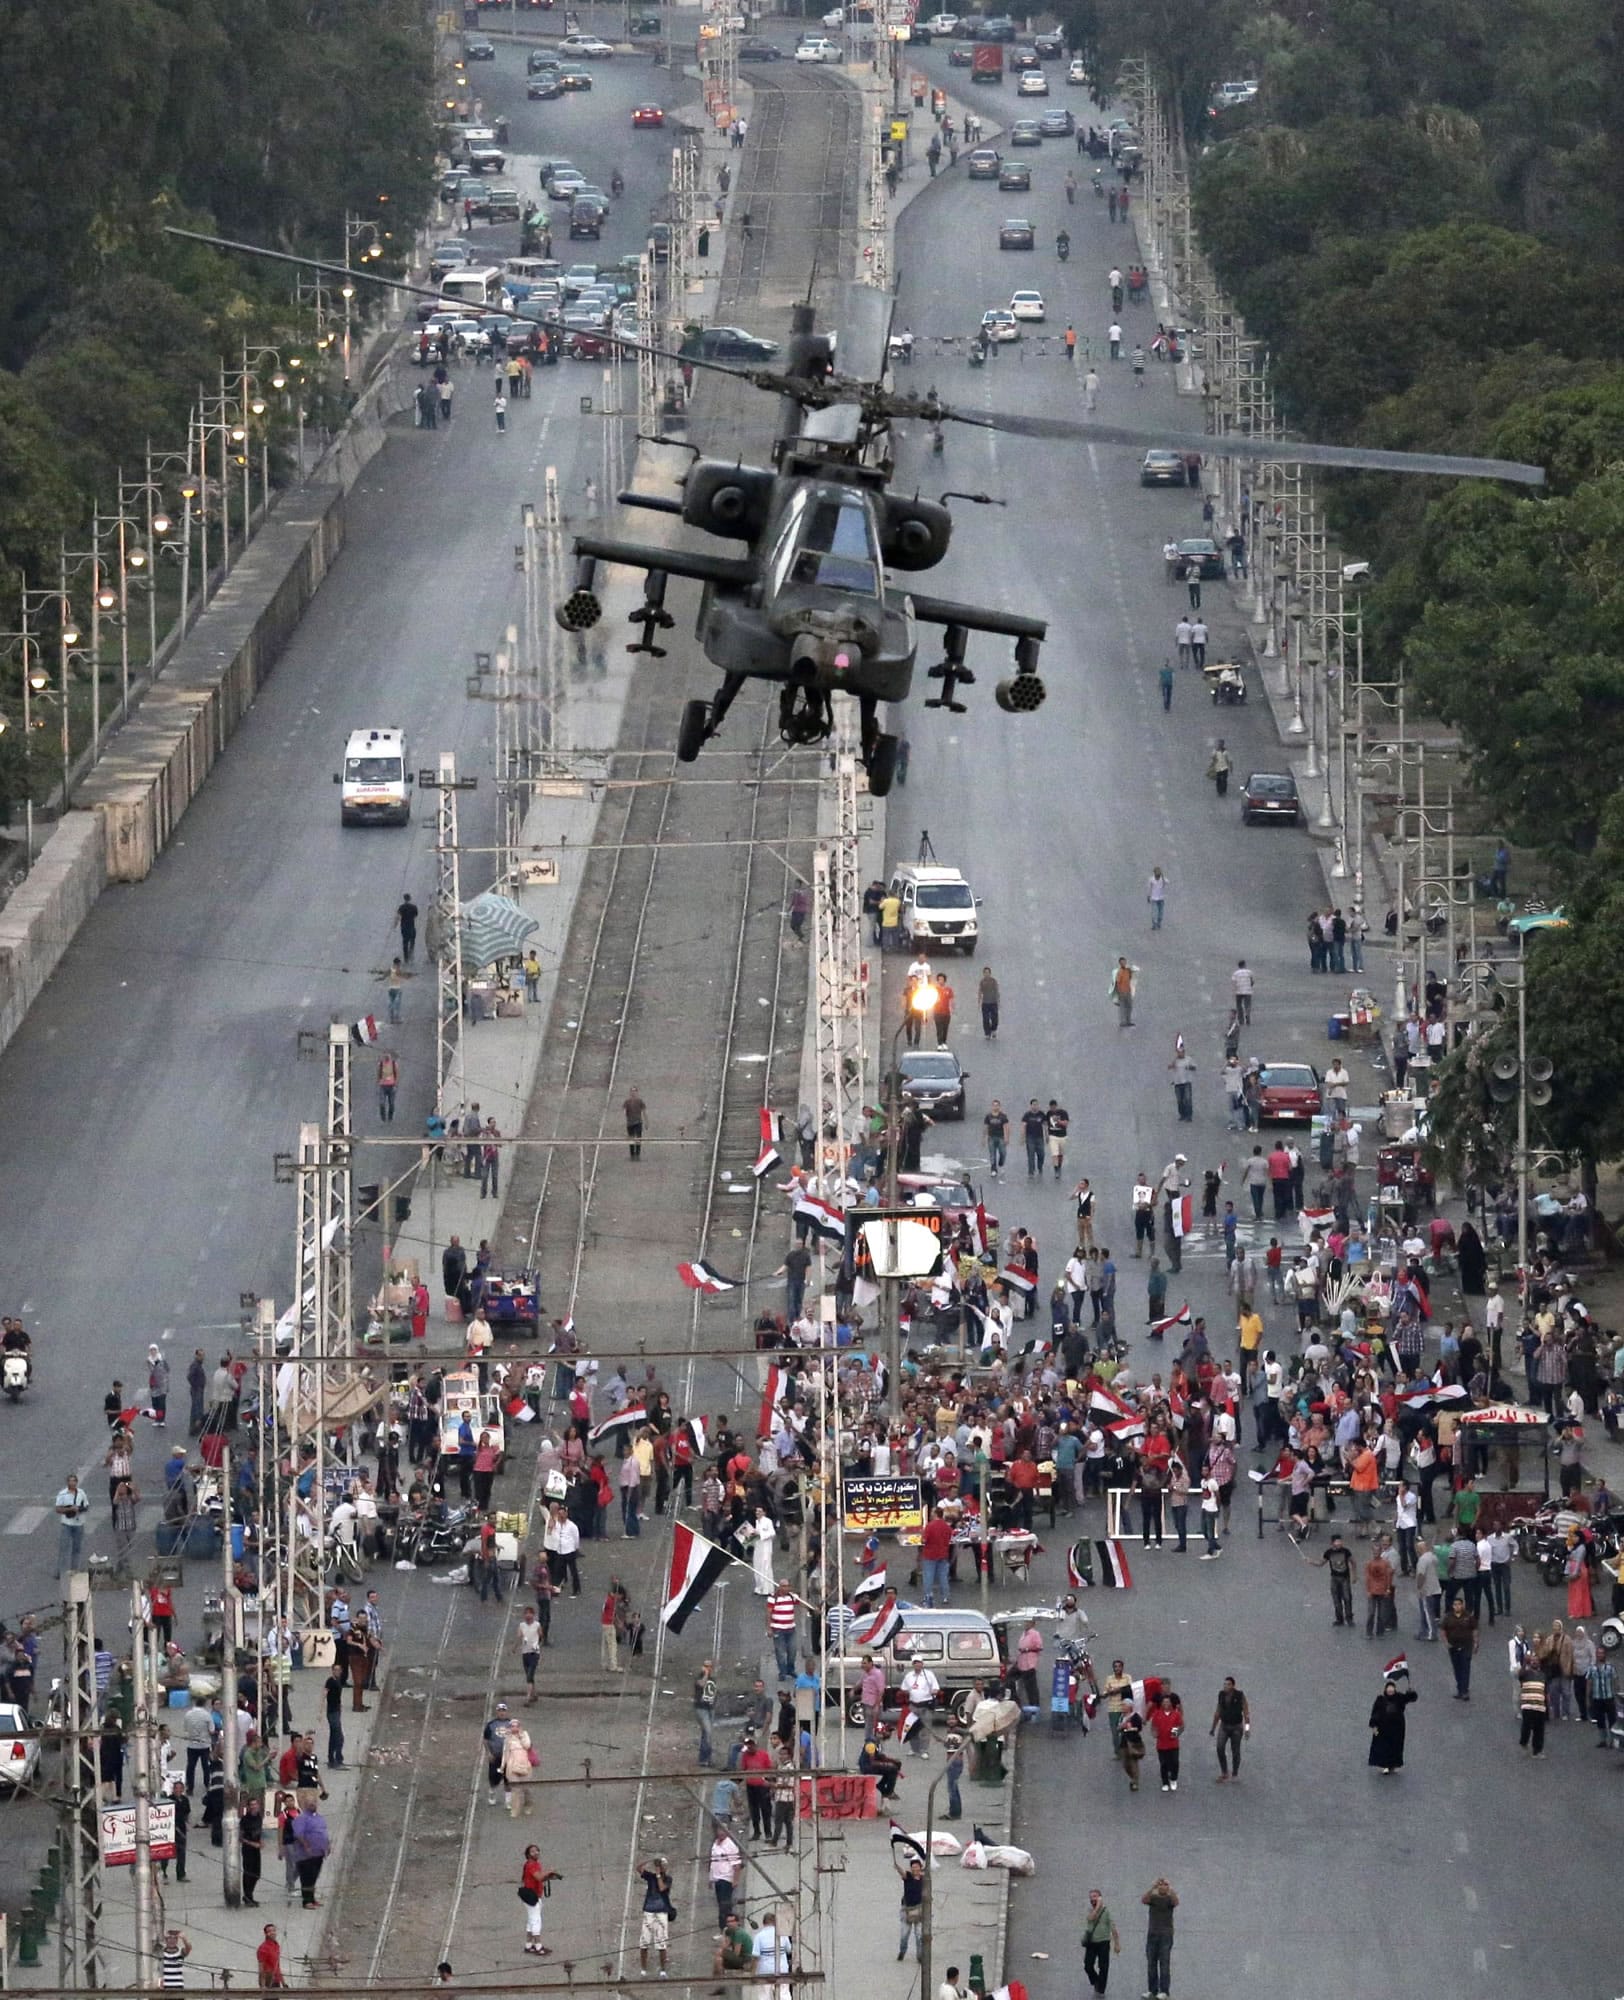 A military attack helicopter flies over a street near the presidential palace, in Cairo, Egypt, Friday, July 5, 2013. The top leader of Egypt's Muslim Brotherhood has vowed to restore ousted President Mohammed Morsi to office, saying Egyptians will not accept &quot;military rule&quot; for another day. General Guide Mohammed Badie, a revered figure among the Brotherhood's followers, spoke Friday before a crowd of tens of thousands of Morsi supporters in Cairo. A military helicopter circled low overhead.